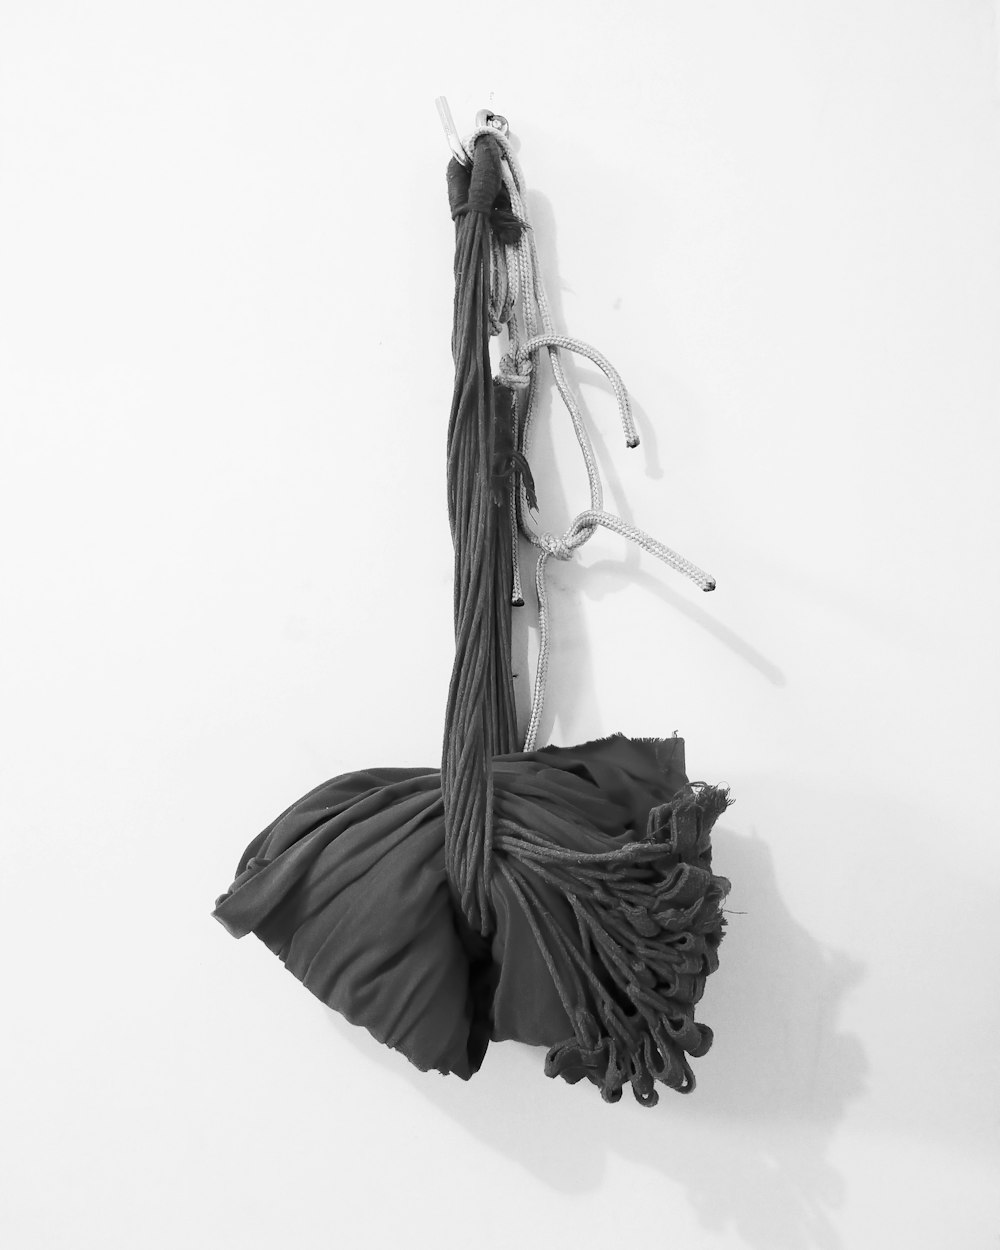 grayscale photography of a shawl hanging on wall